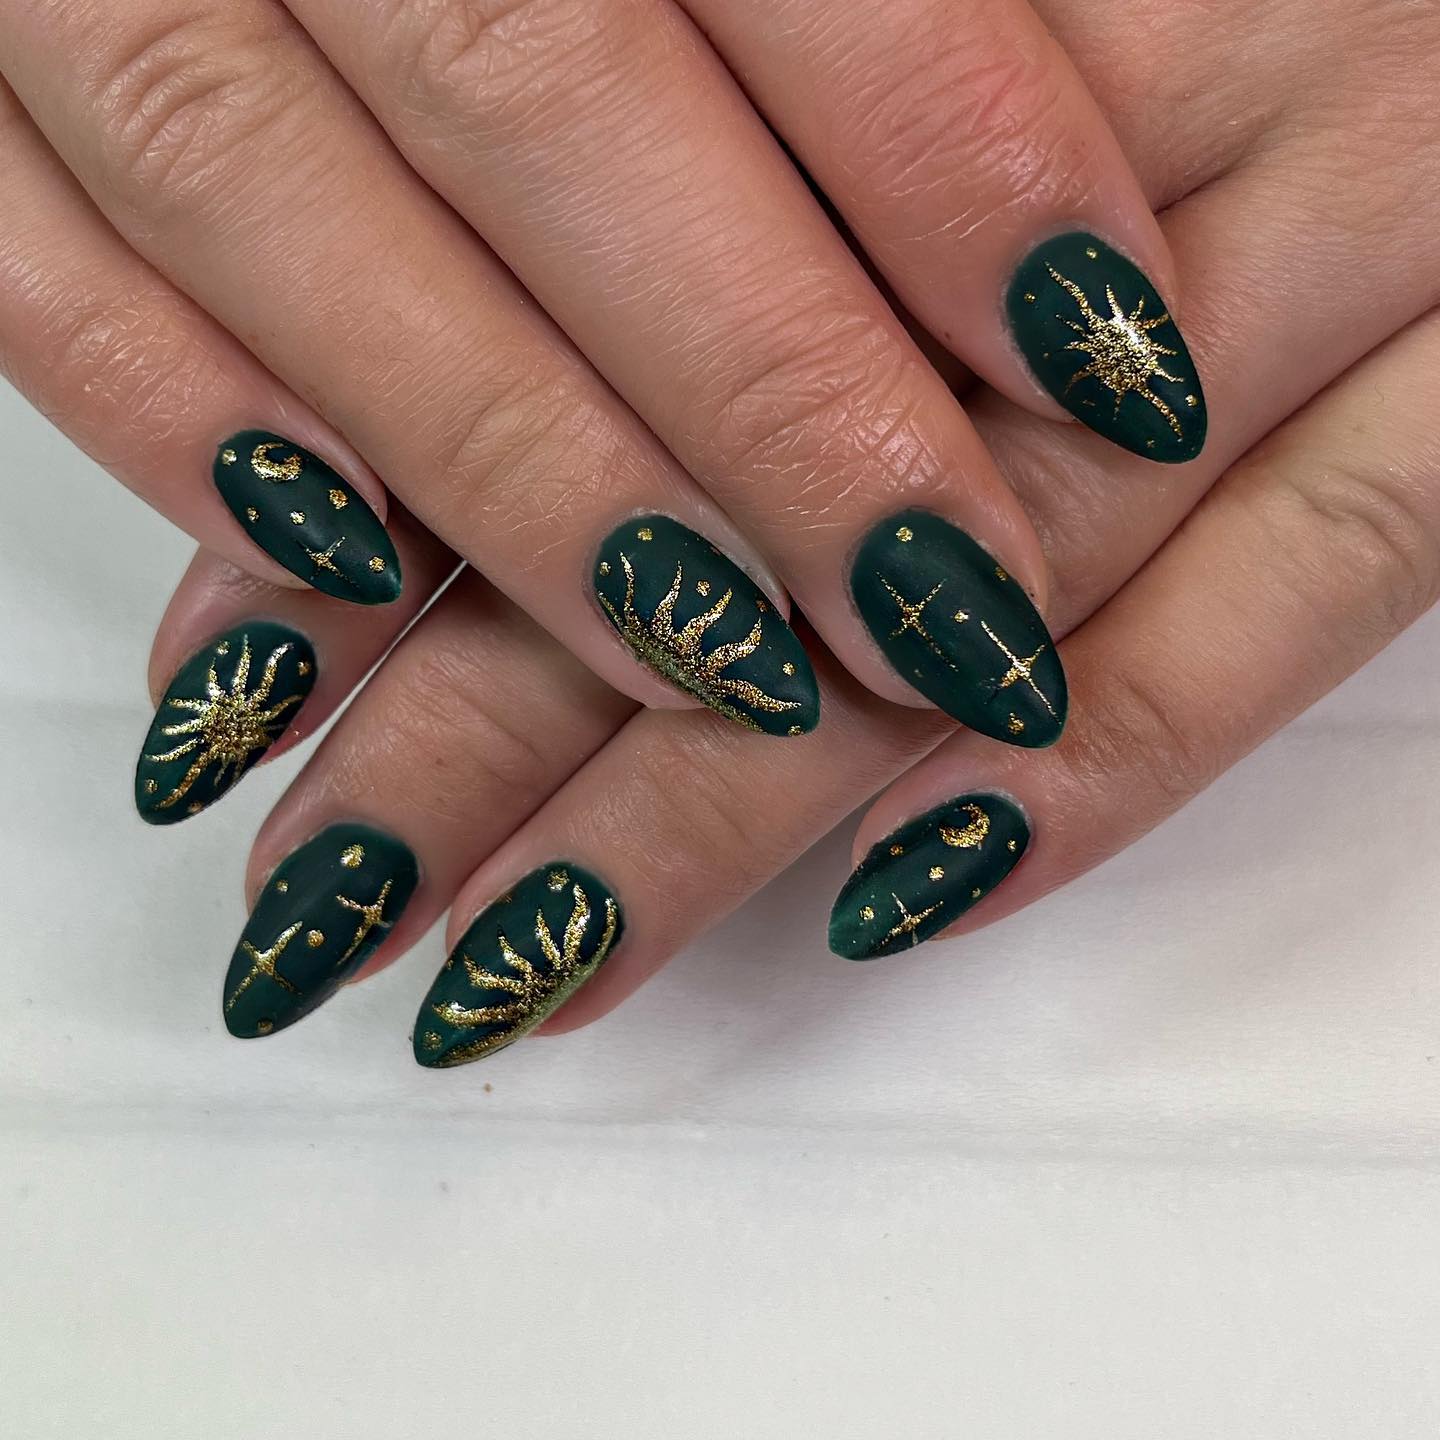 Dark Green Nails with Sun, Moon, and Stars